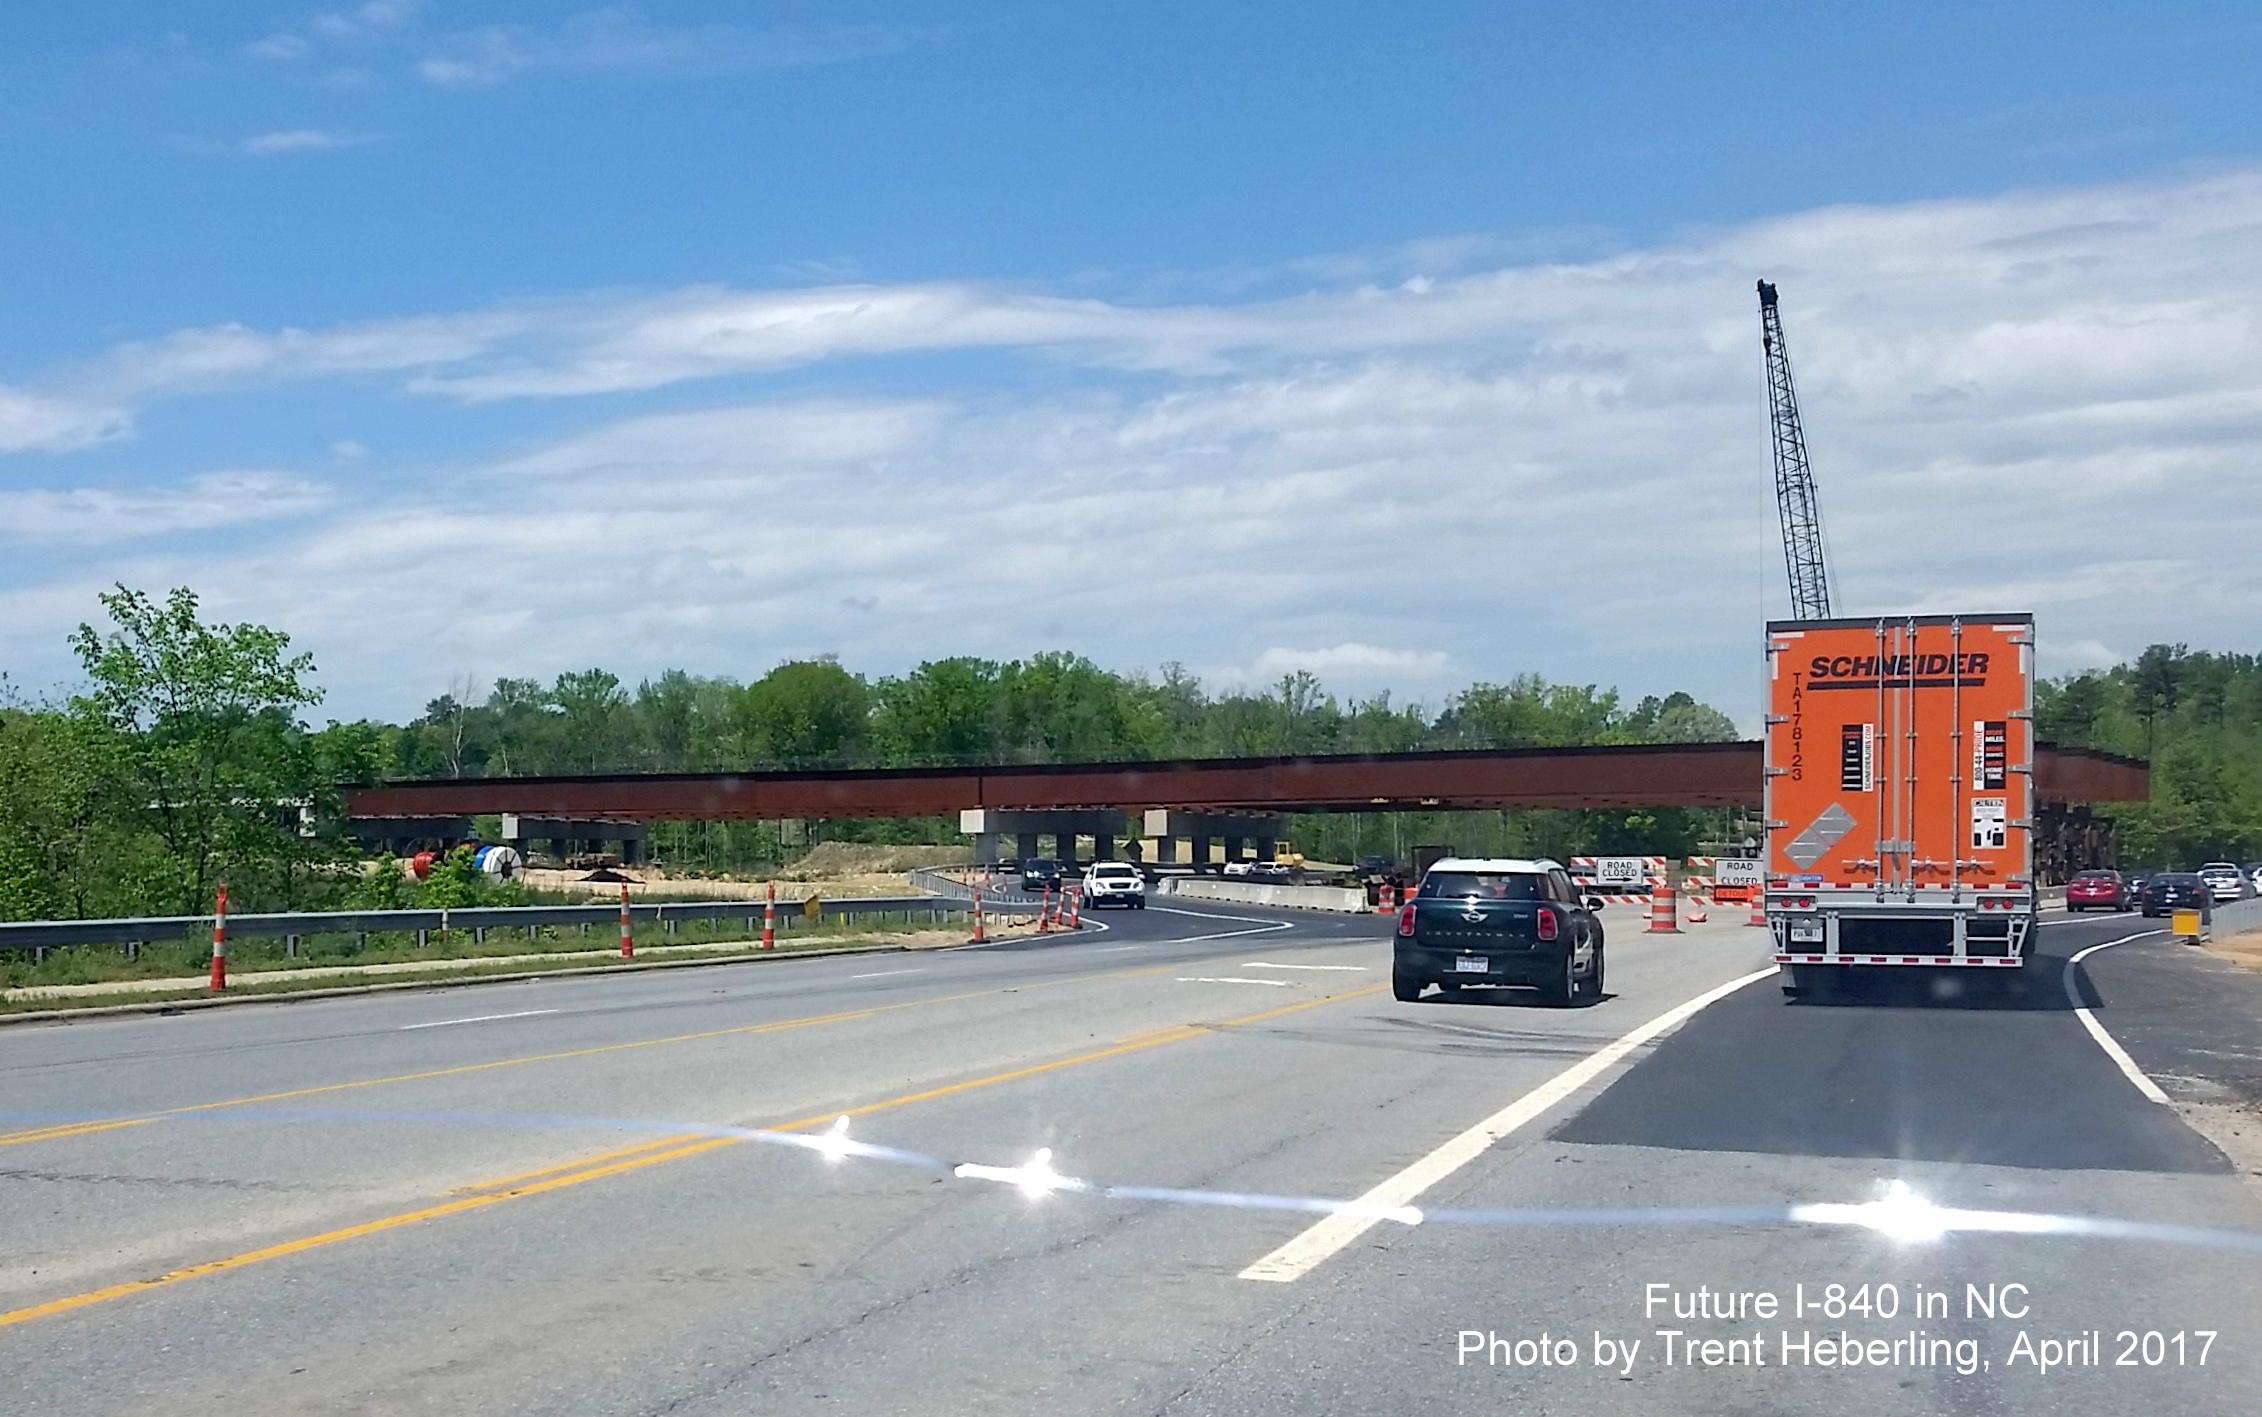 Image taken of construction along US 220 in Greensboro for Future I-840 interchange, by Trent Heberling